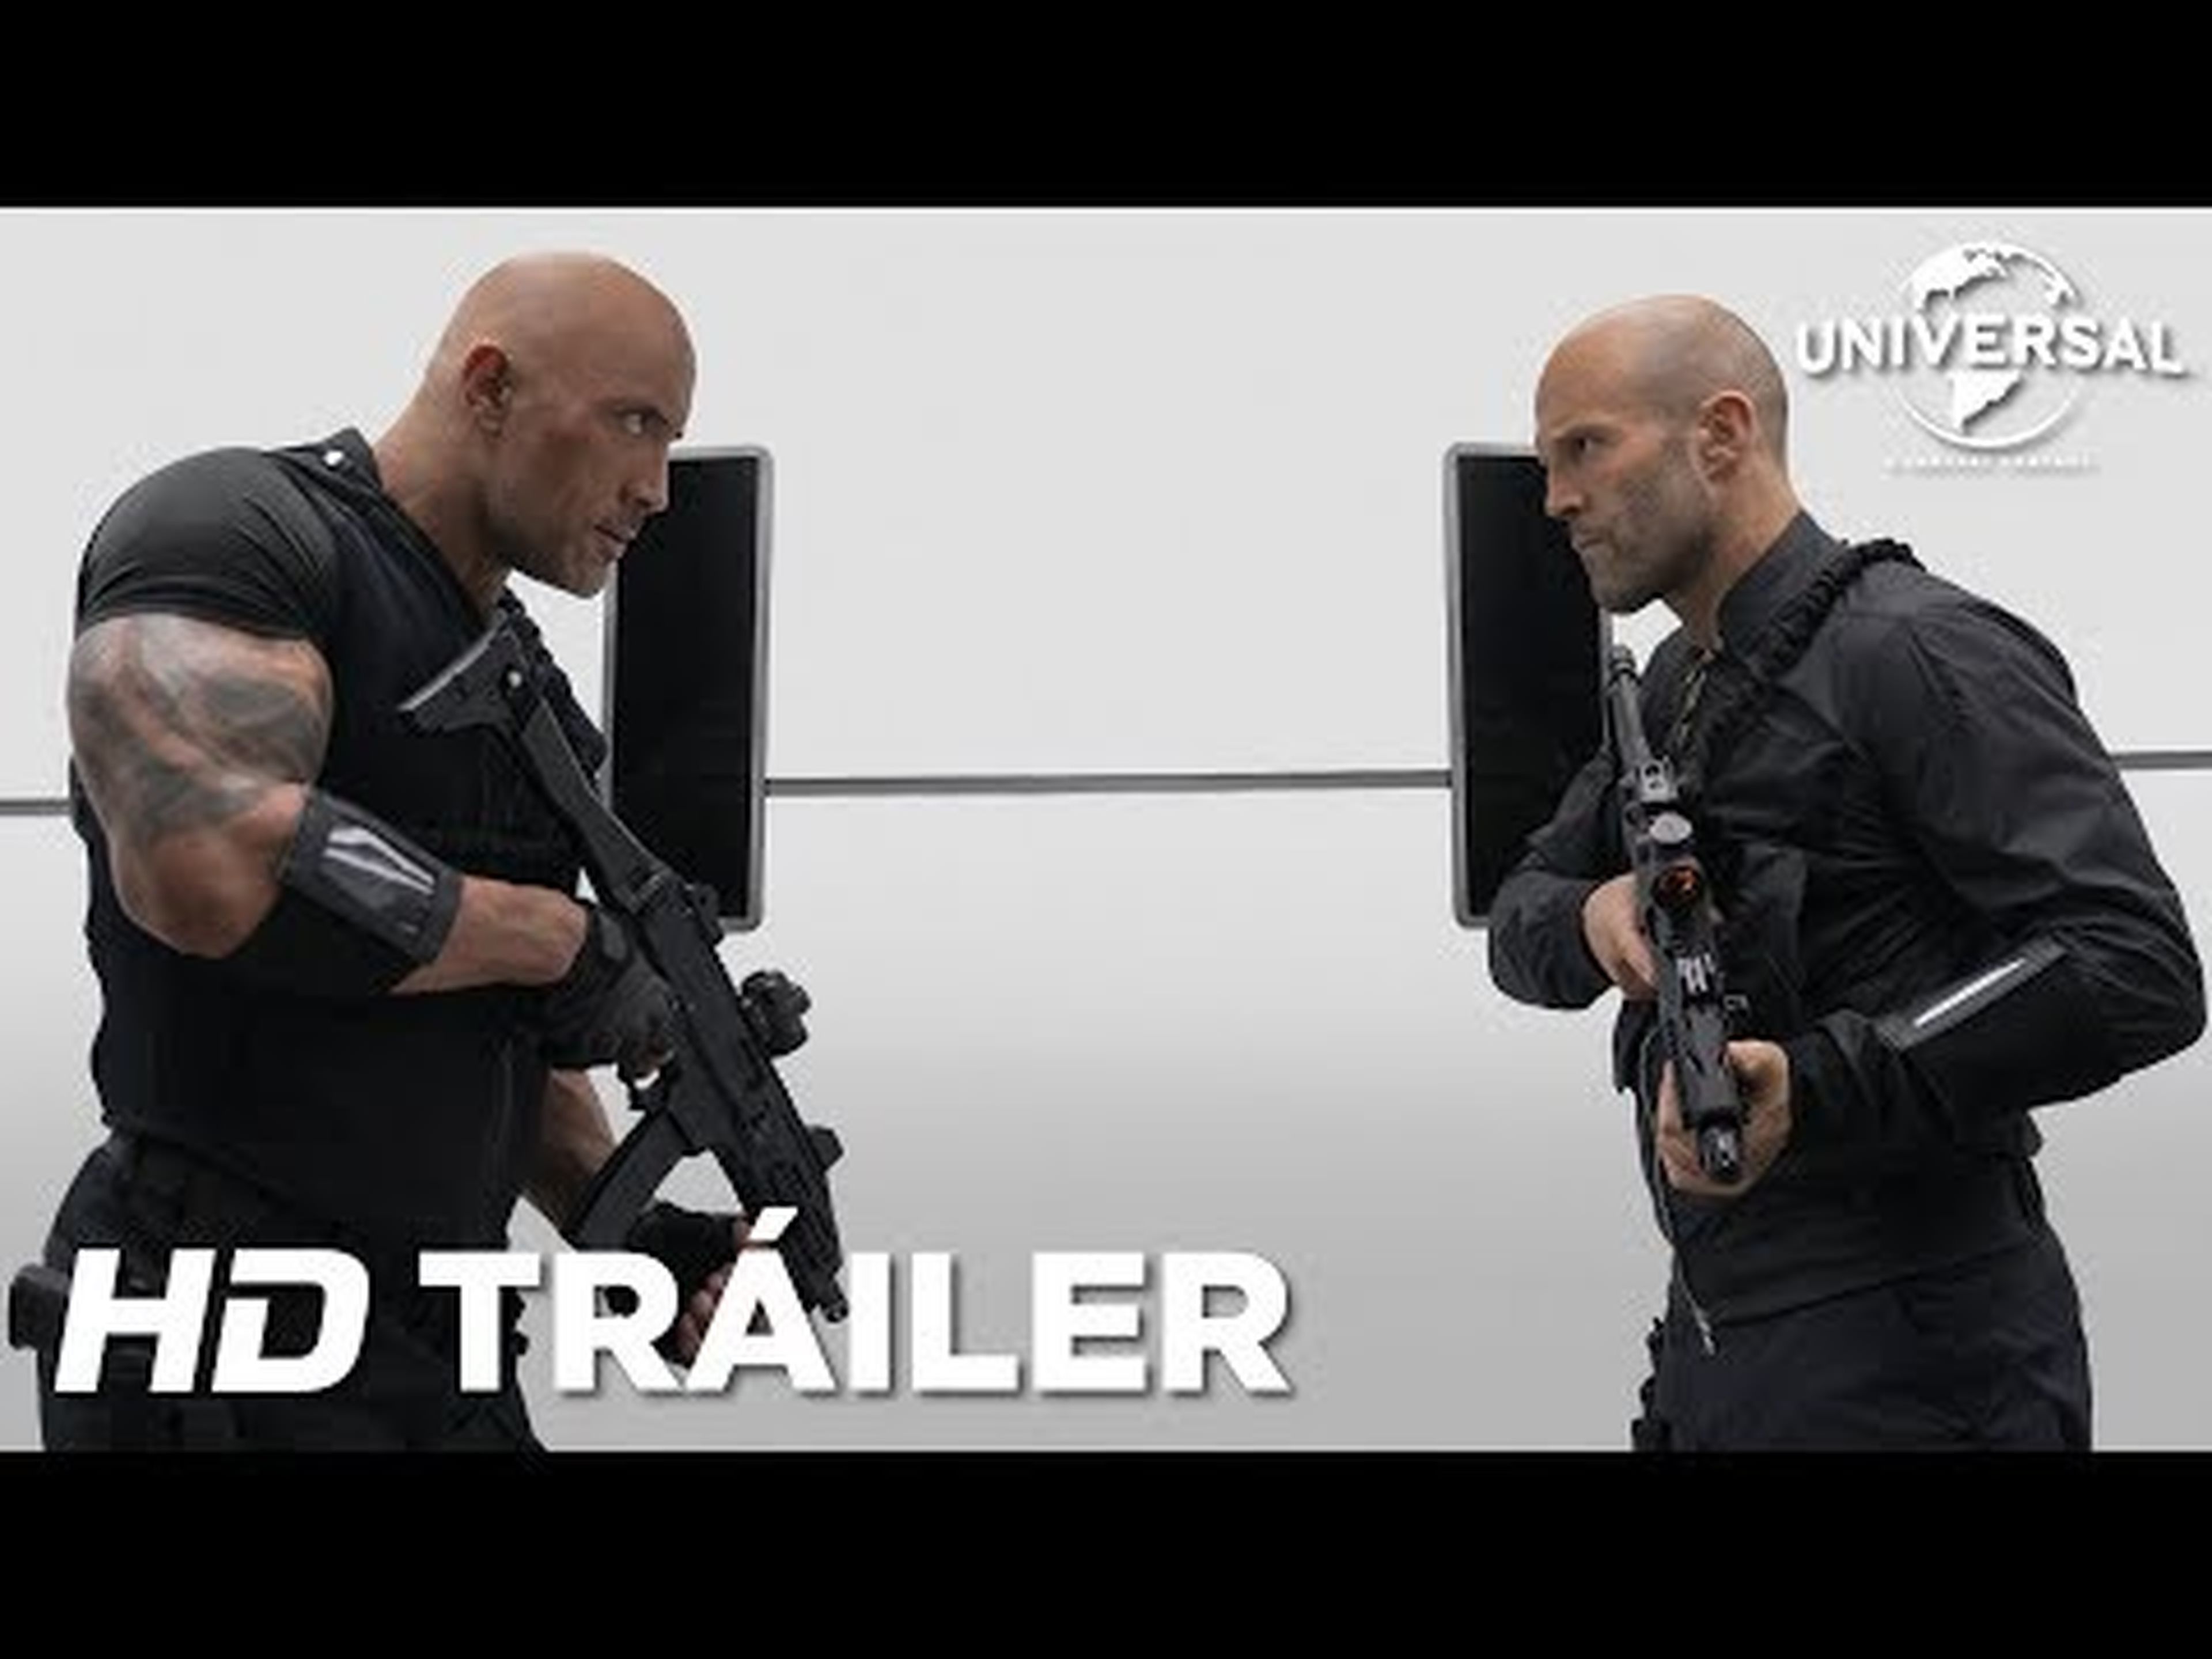 FAST & FURIOUS: HOBBS & SHAW - Tráiler Mundial (Universal Pictures) - HD